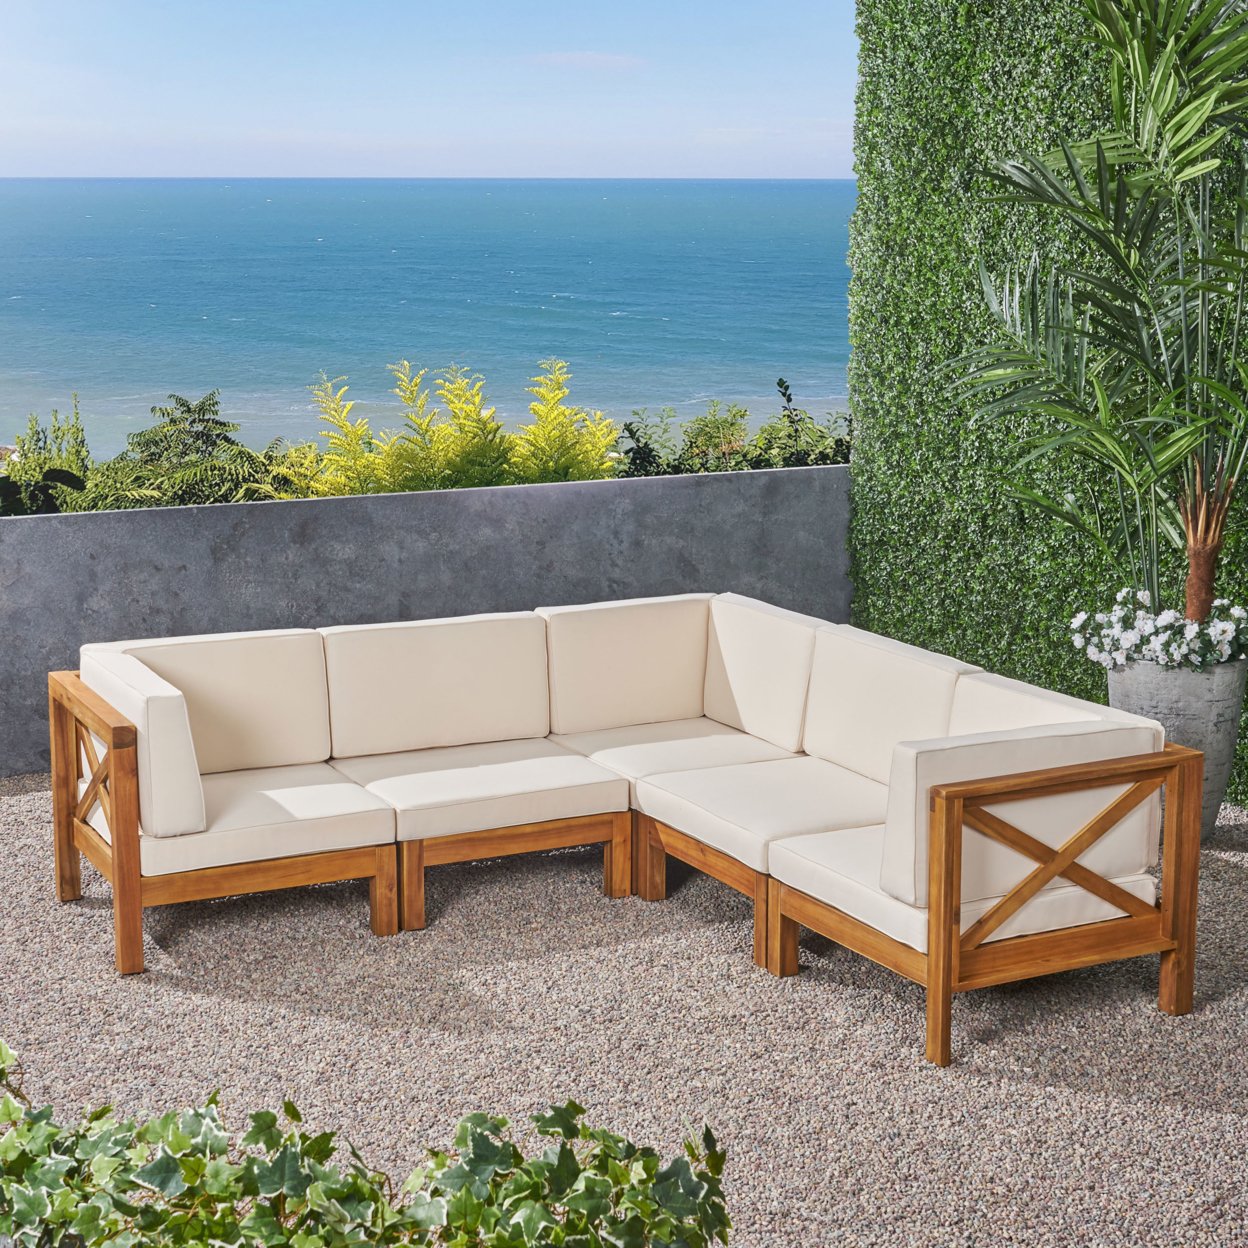 Brava Outdoor Acacia Wood 5 Seater Sectional Sofa Set With Water-Resistant Cushions - Teak Finish + Blue